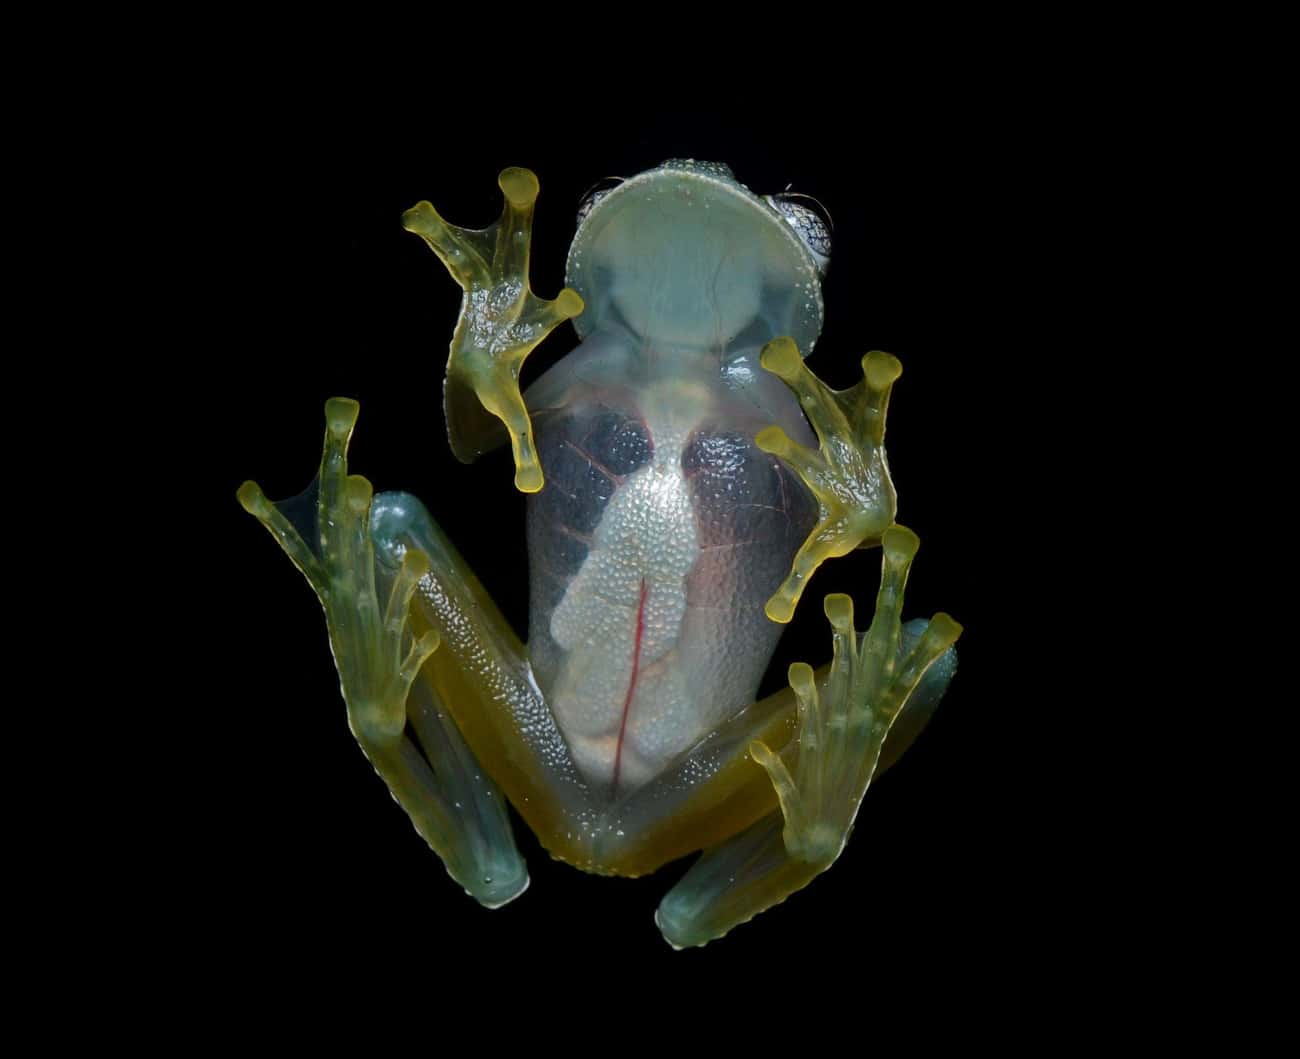 Cancer Researchers Made Frogs' Skin Transparent